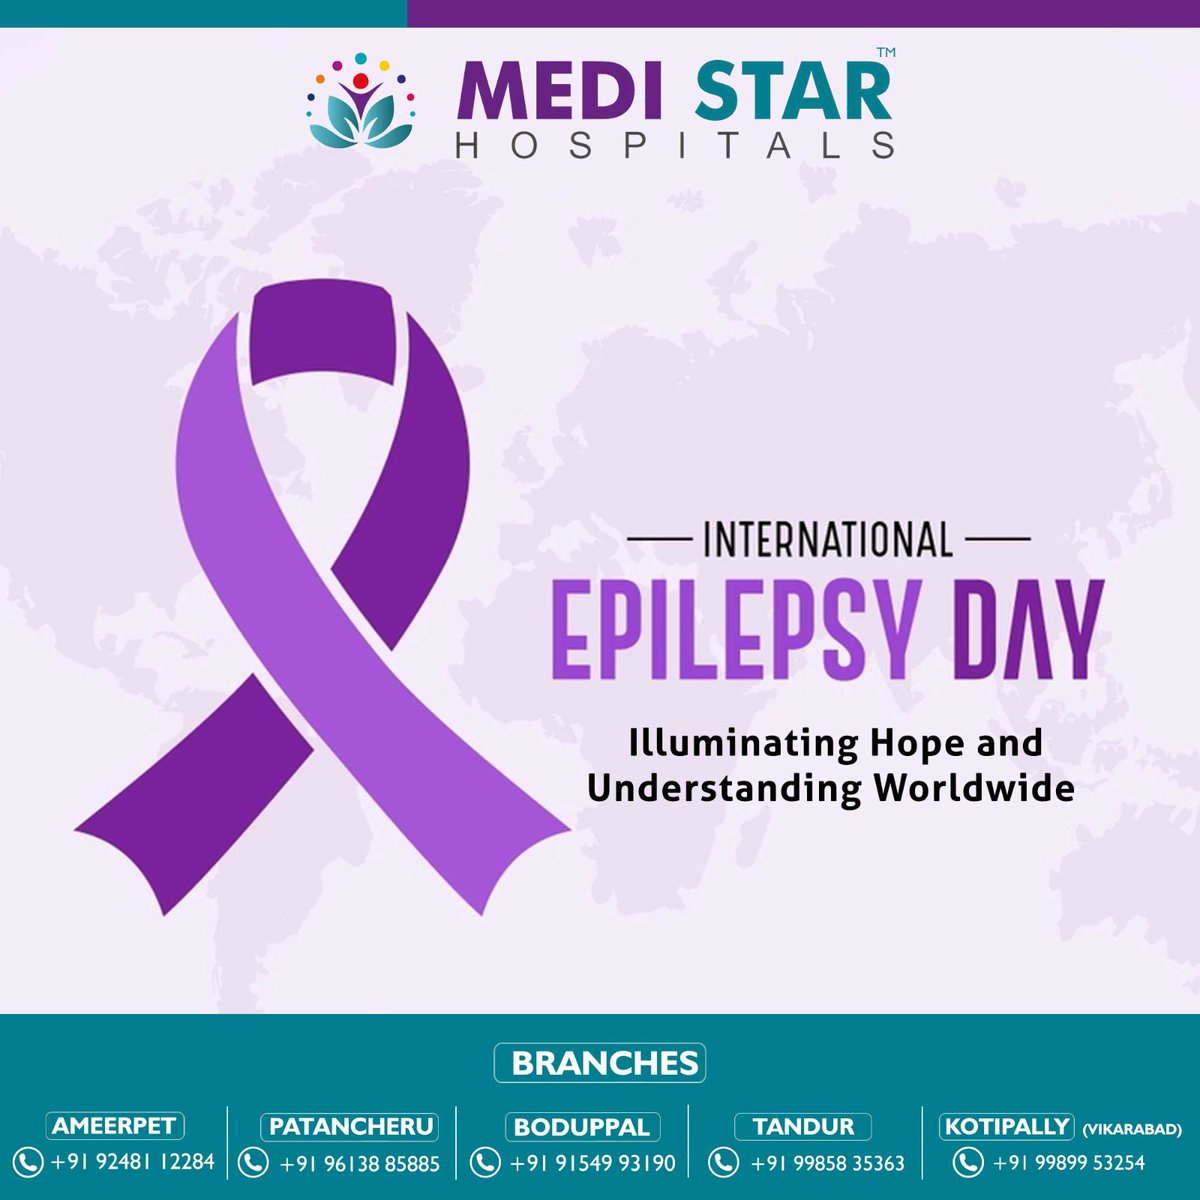 Every voice matters. Let's amplify awareness and support for epilepsy on International Epilepsy Day and beyond
#EpilepsyAwareness #EpilepsyDay #PurpleDay #EndEpilepsy #EpilepsyWarrior #EpilepsyEducation #EpilepsyResearch #Medistarhospitals1 #Medistarhospitals #Hyderabad